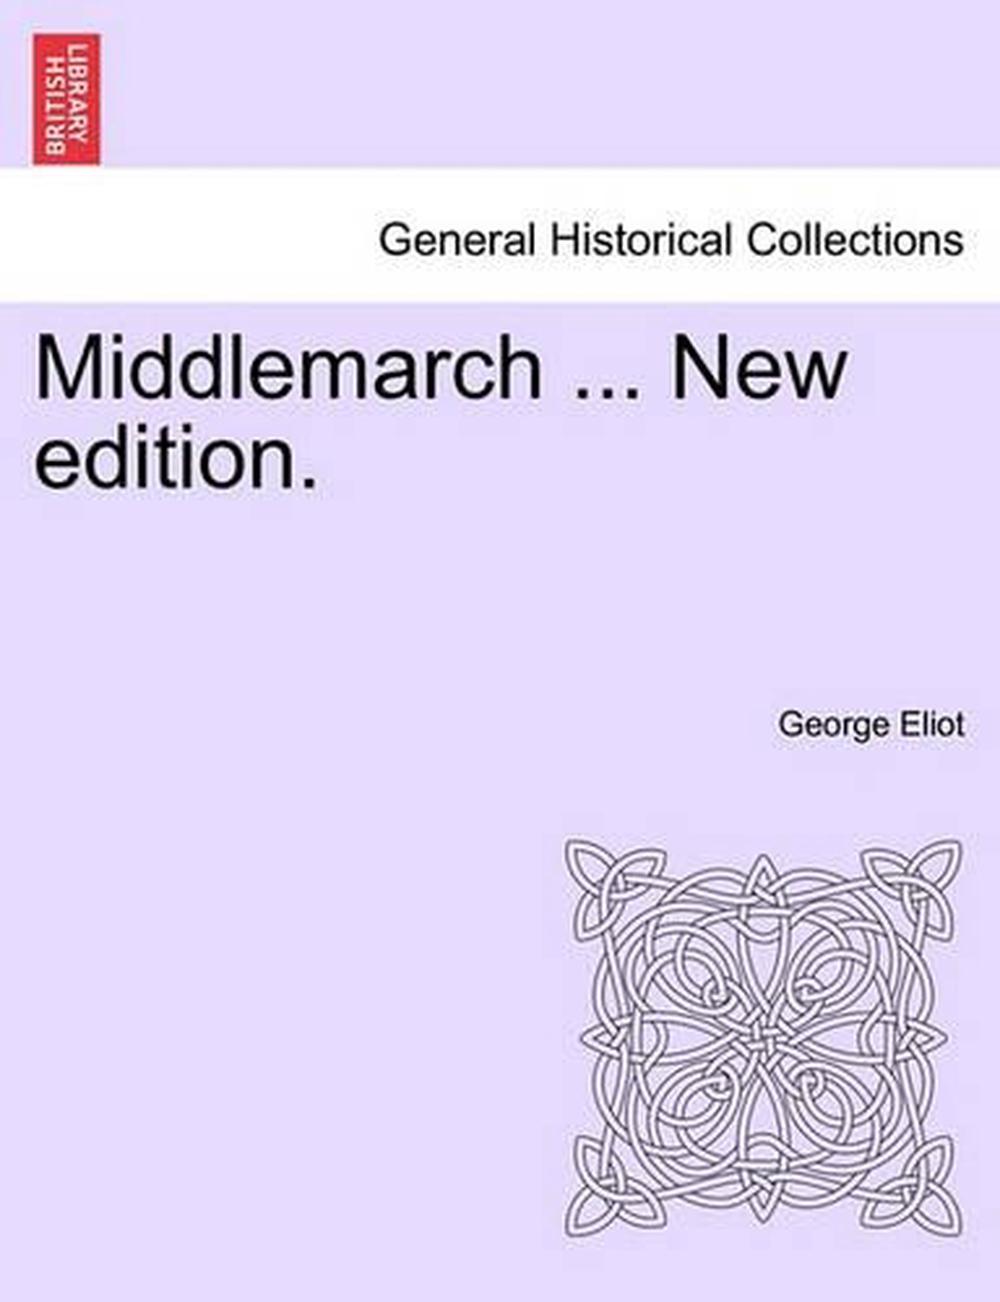 download the new Middlemarch